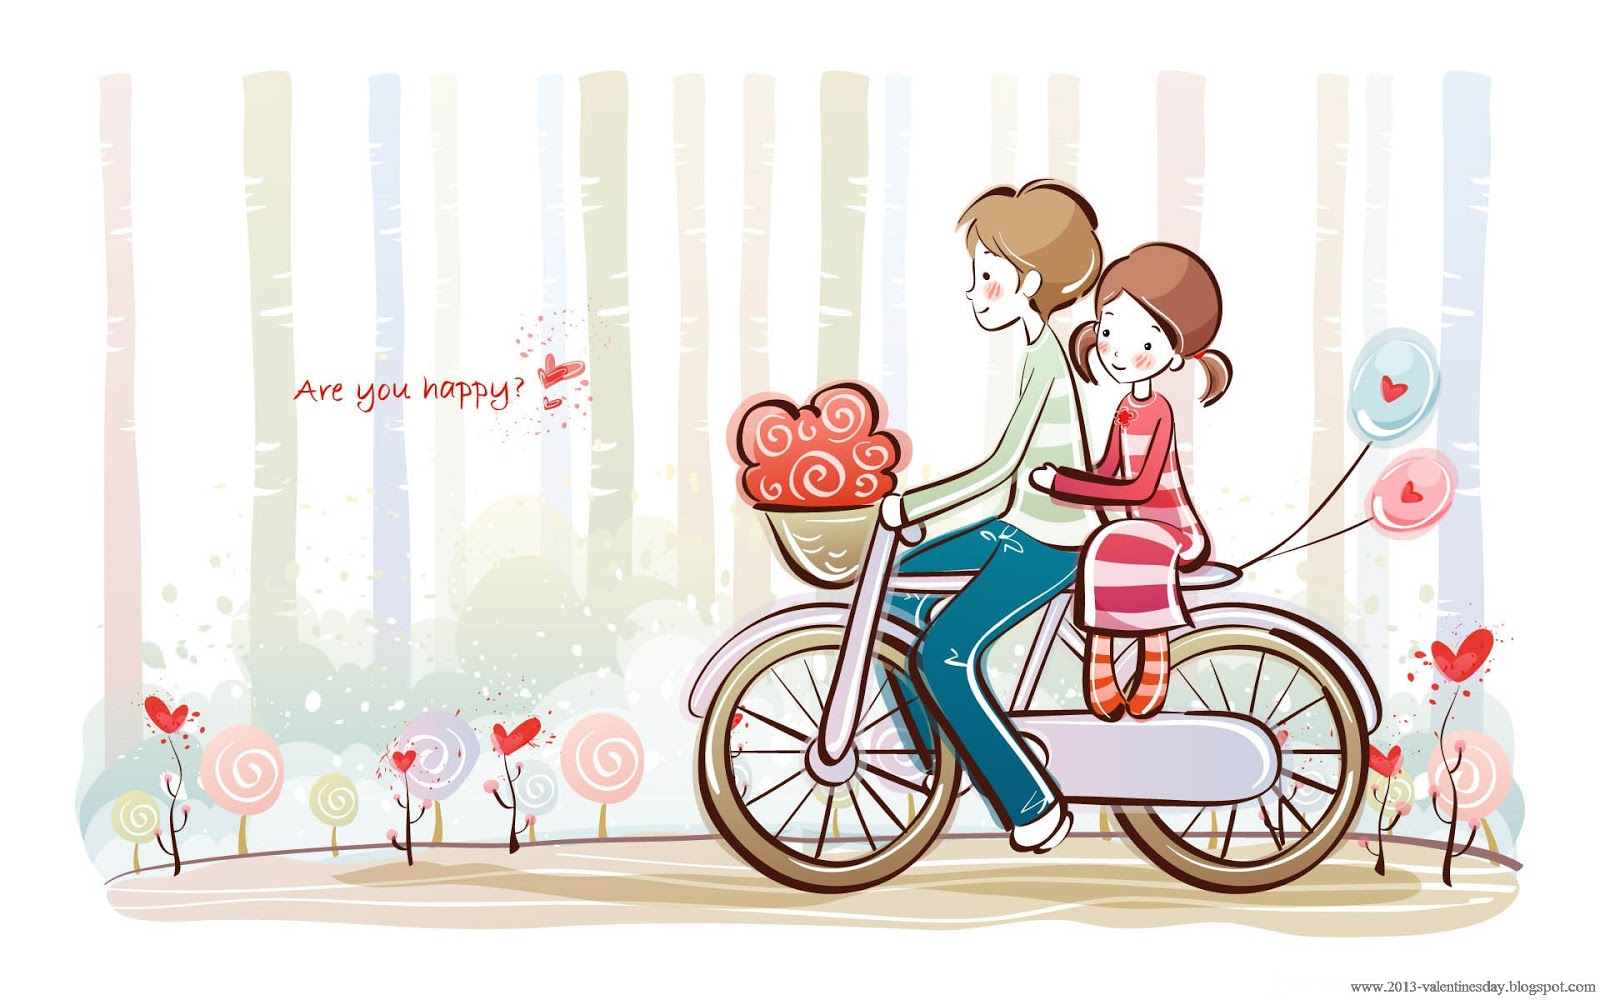 Cute Cartoon Couple Love HD Wallpaper For Valentines Day Online